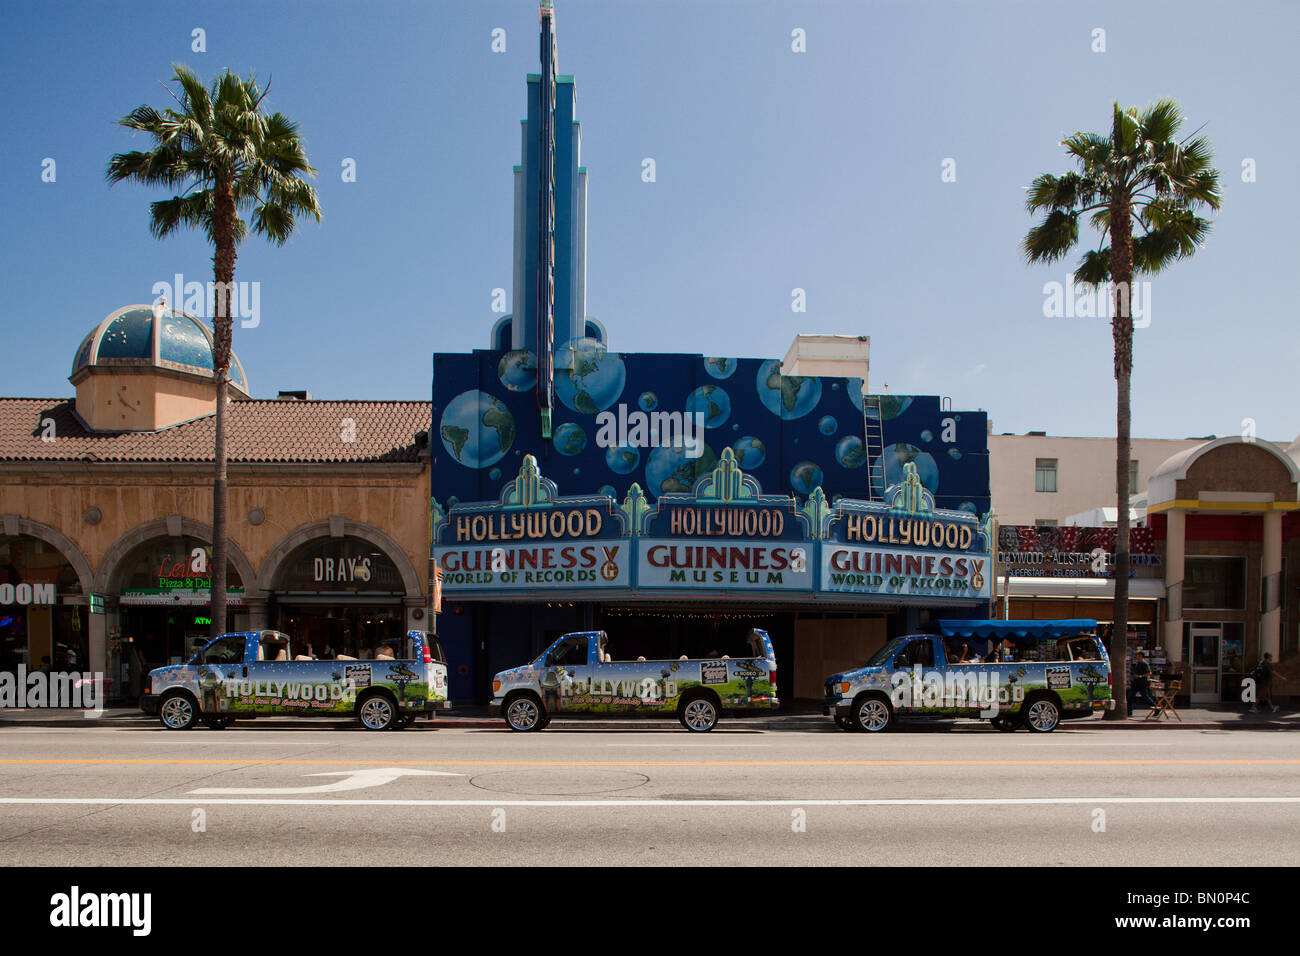 Hollywood Guiness Museum, Los Angeles, California, United States of America Stock Photo